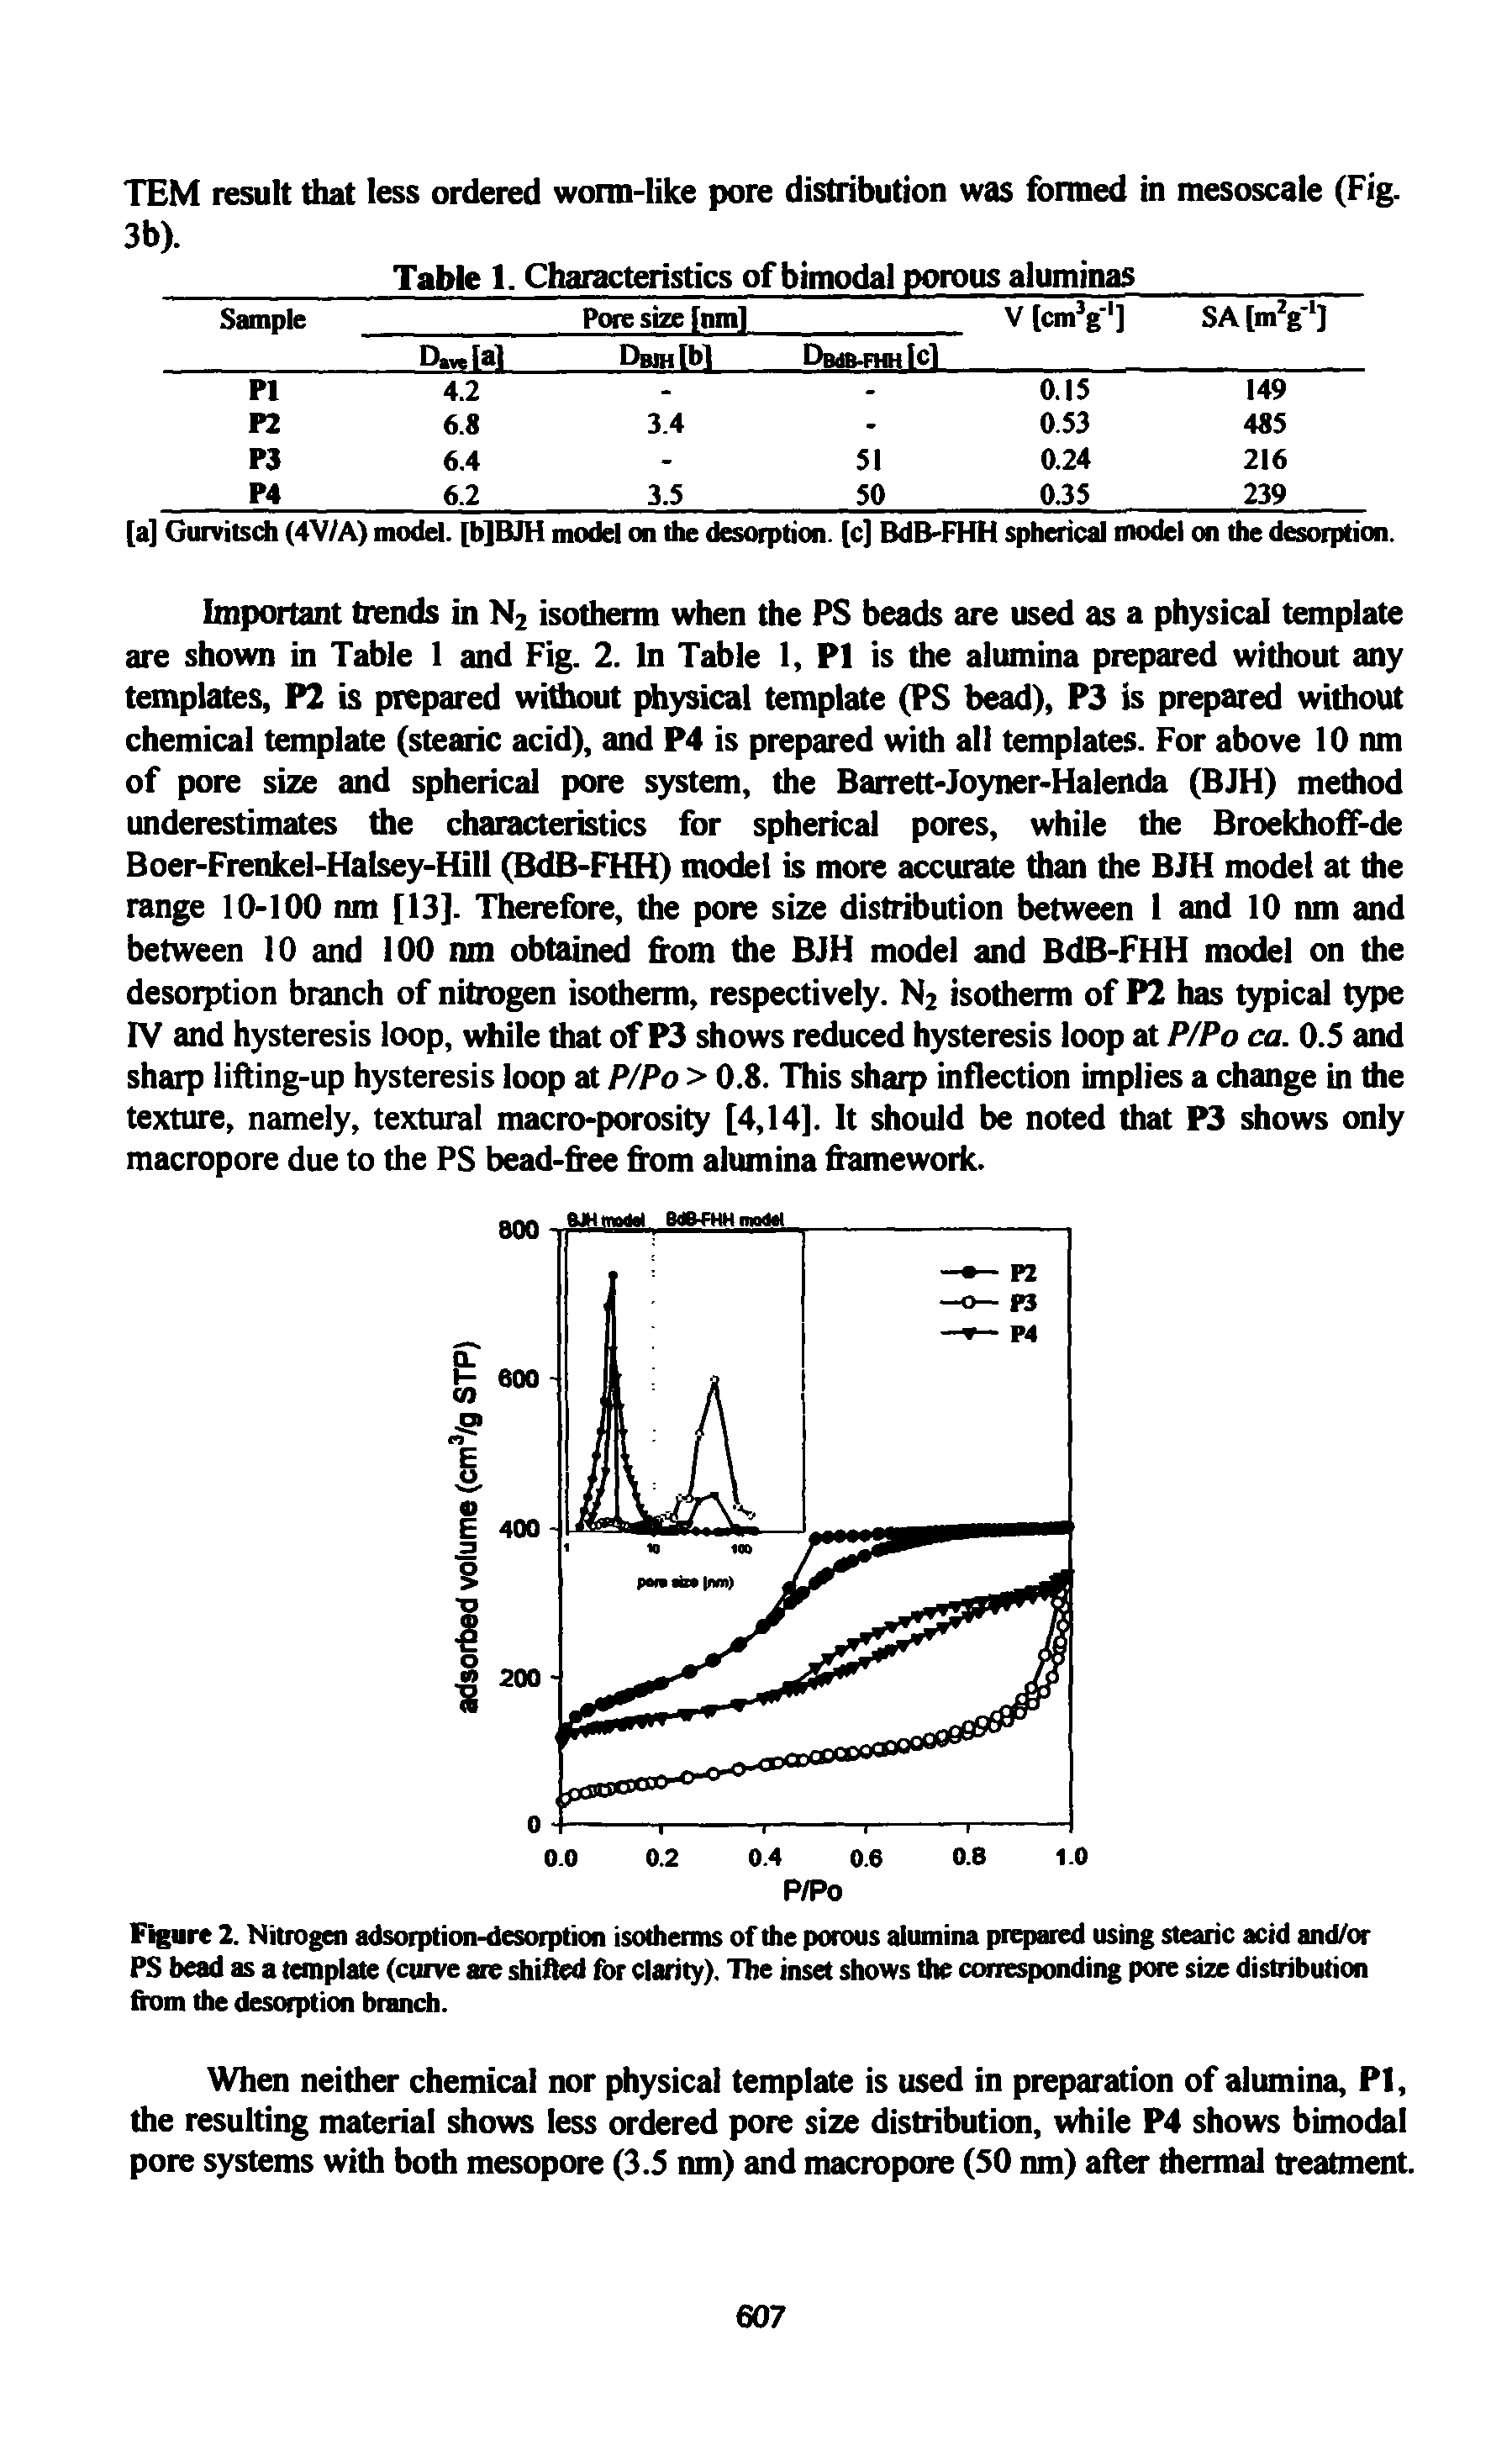 Figure 2. Niuogcn adsorption-desorption isotherms of the porous alumina prepared using stearic acid and/or PS bead as a template (curve are shitted for clarity). The inset shows the corresponding pore size distribution from the desorption branch.